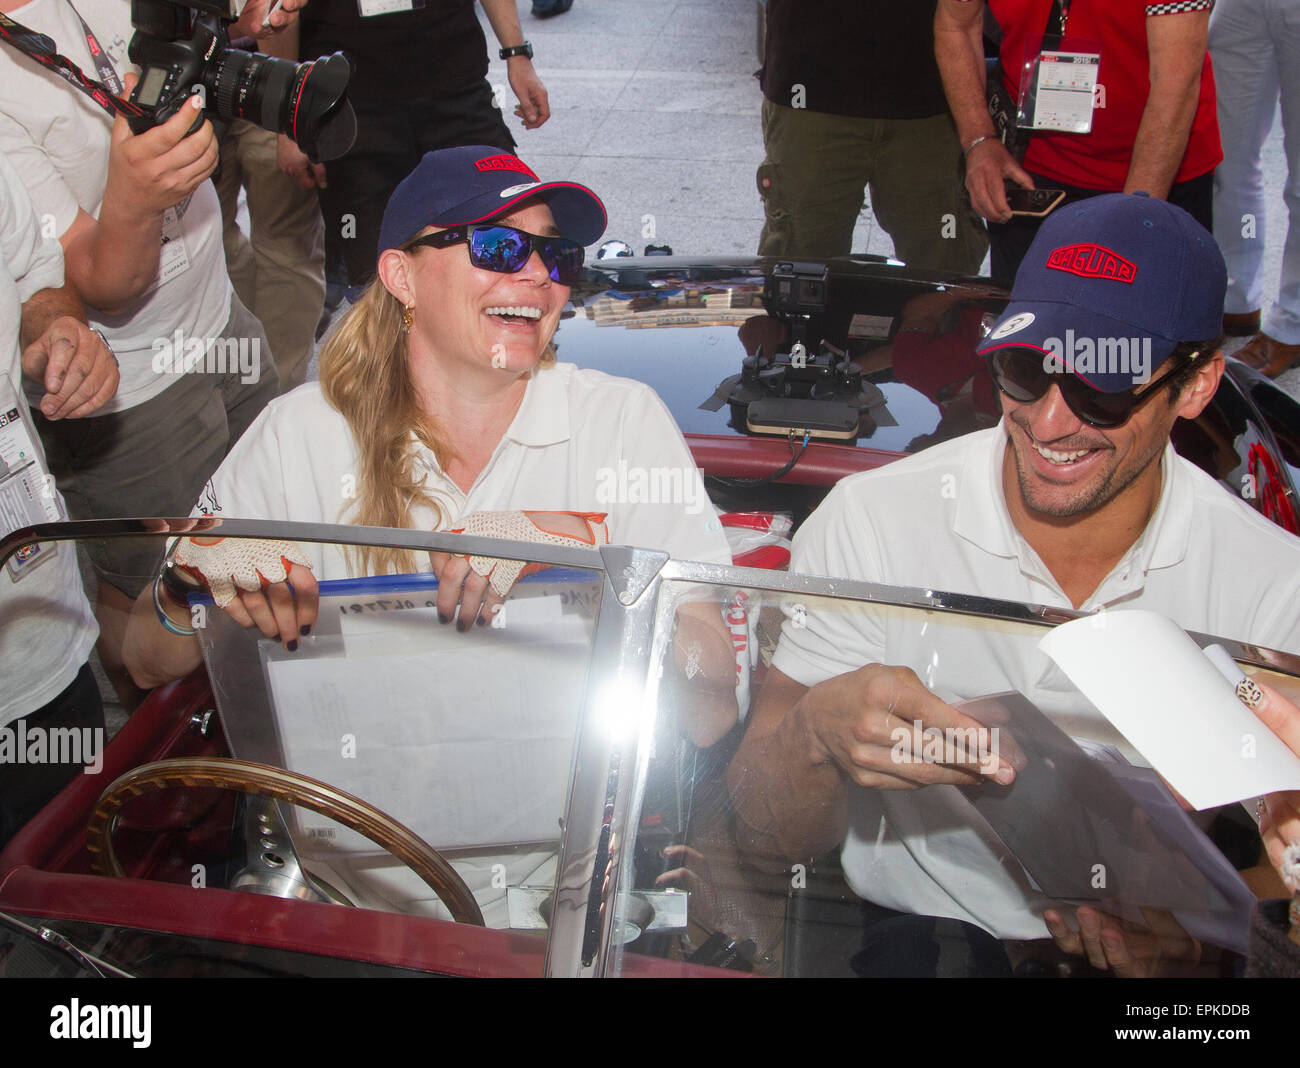 Models Jodie Kidd and David gandy in Piazza Vittoria for the start of the classic Italian road race the Mille Miglia from Brescia to Rome and back again covering 1000 miles. 14.05.2015 Stock Photo